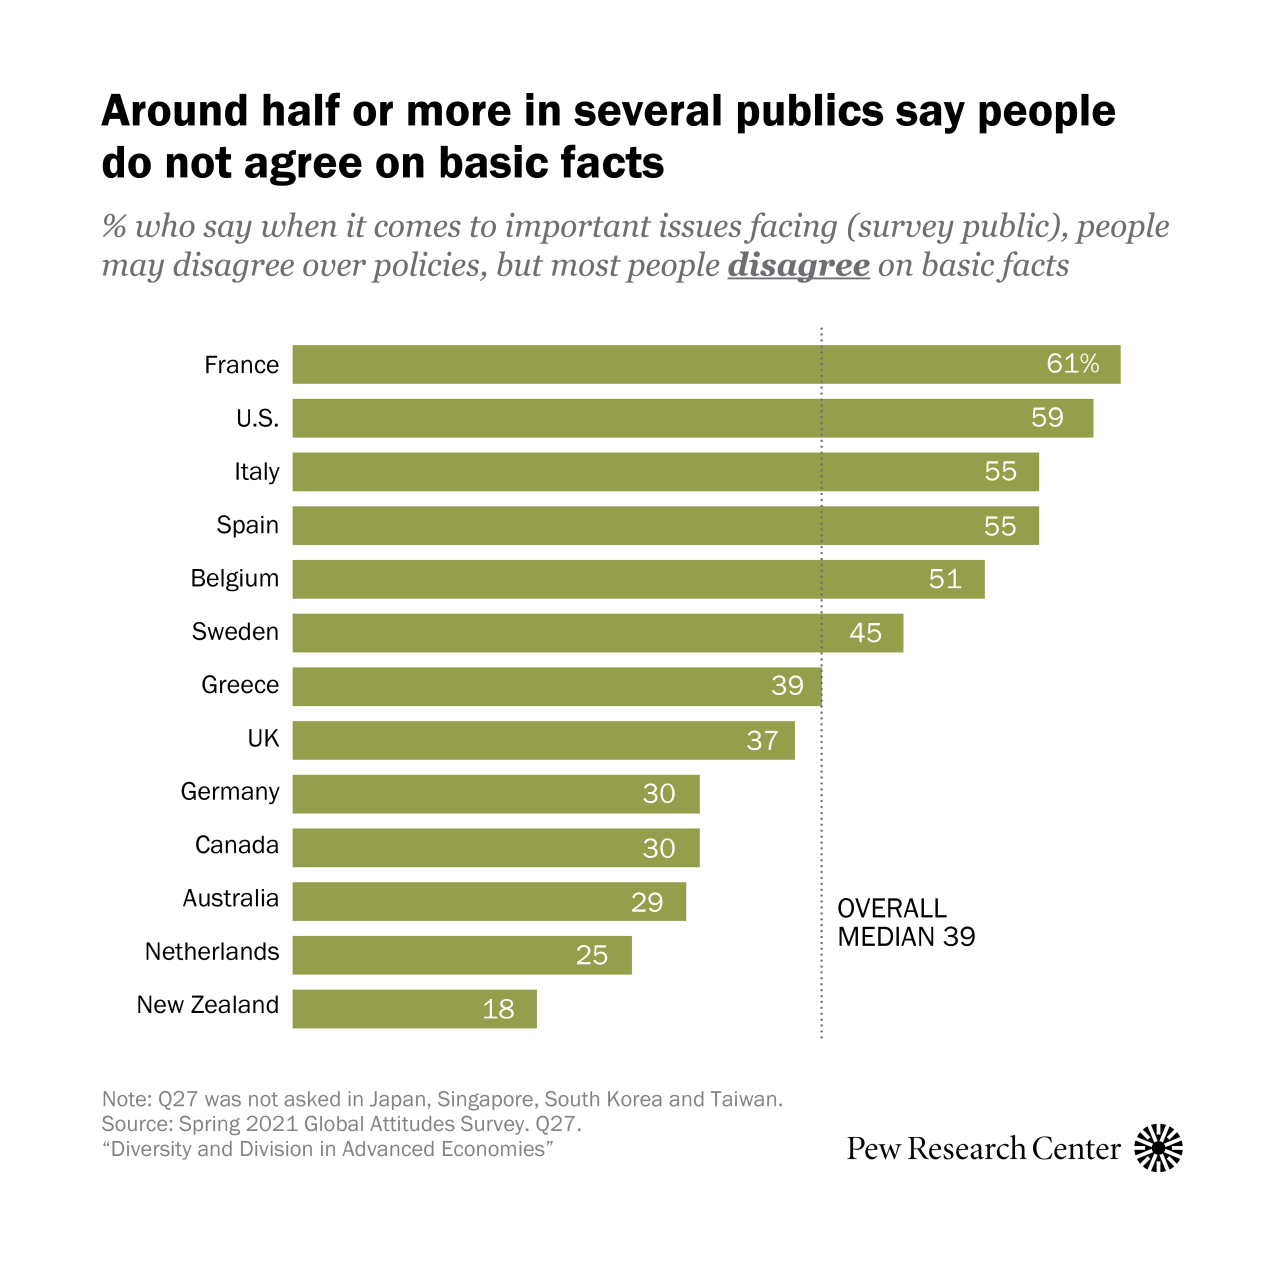 In some publics surveyed, there are majority shares who say when it comes to important issues facing their society, most people disagree on basic facts.
In France and the U.S., about six-in-ten say most people in their country disagree over basic...